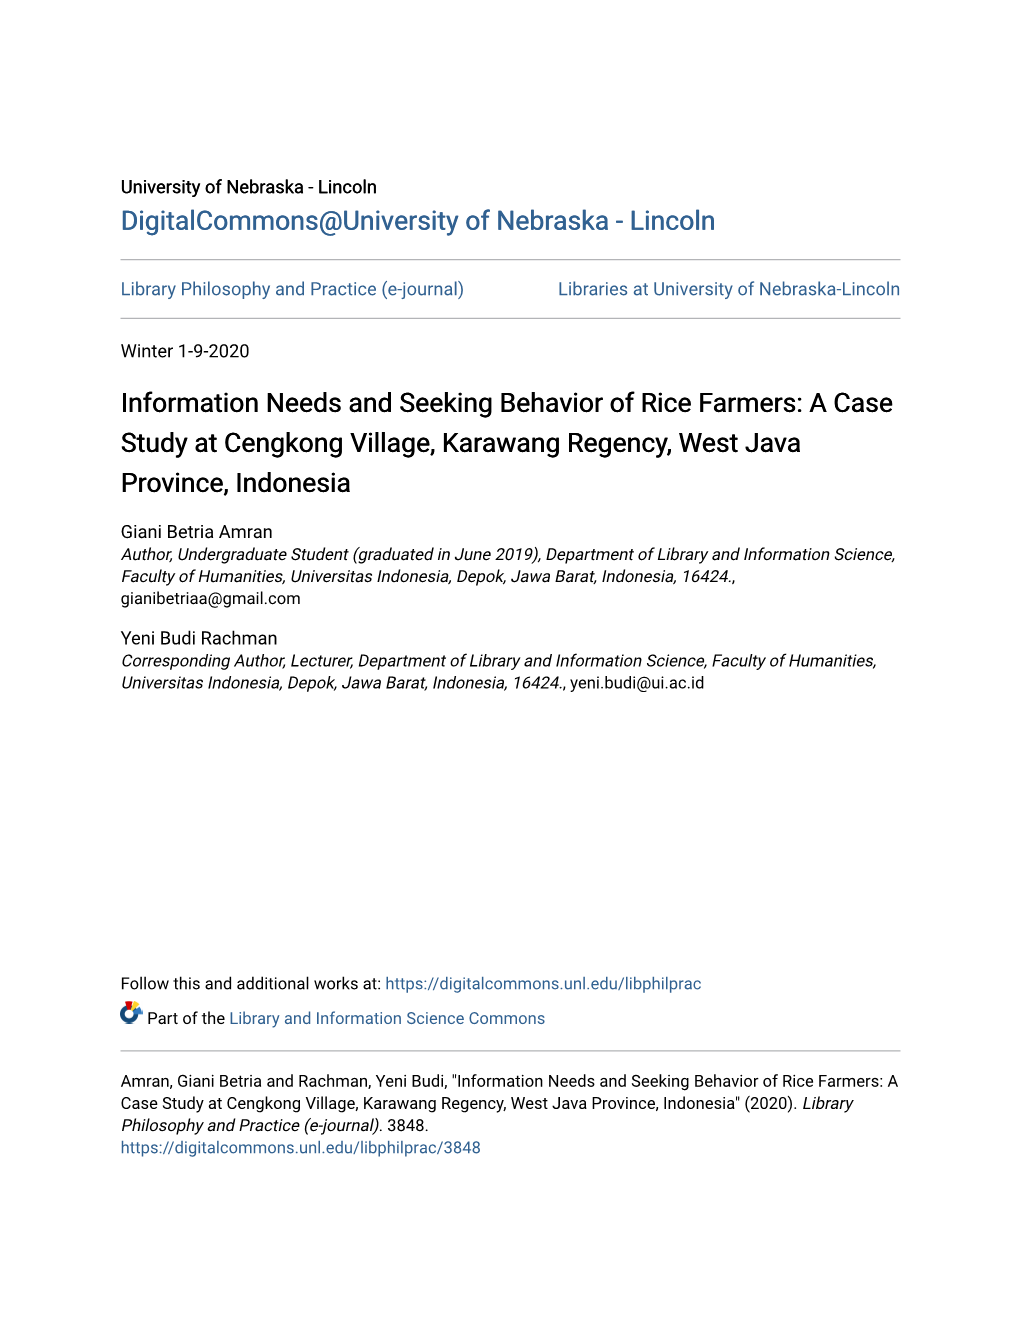 Information Needs and Seeking Behavior of Rice Farmers: a Case Study at Cengkong Village, Karawang Regency, West Java Province, Indonesia